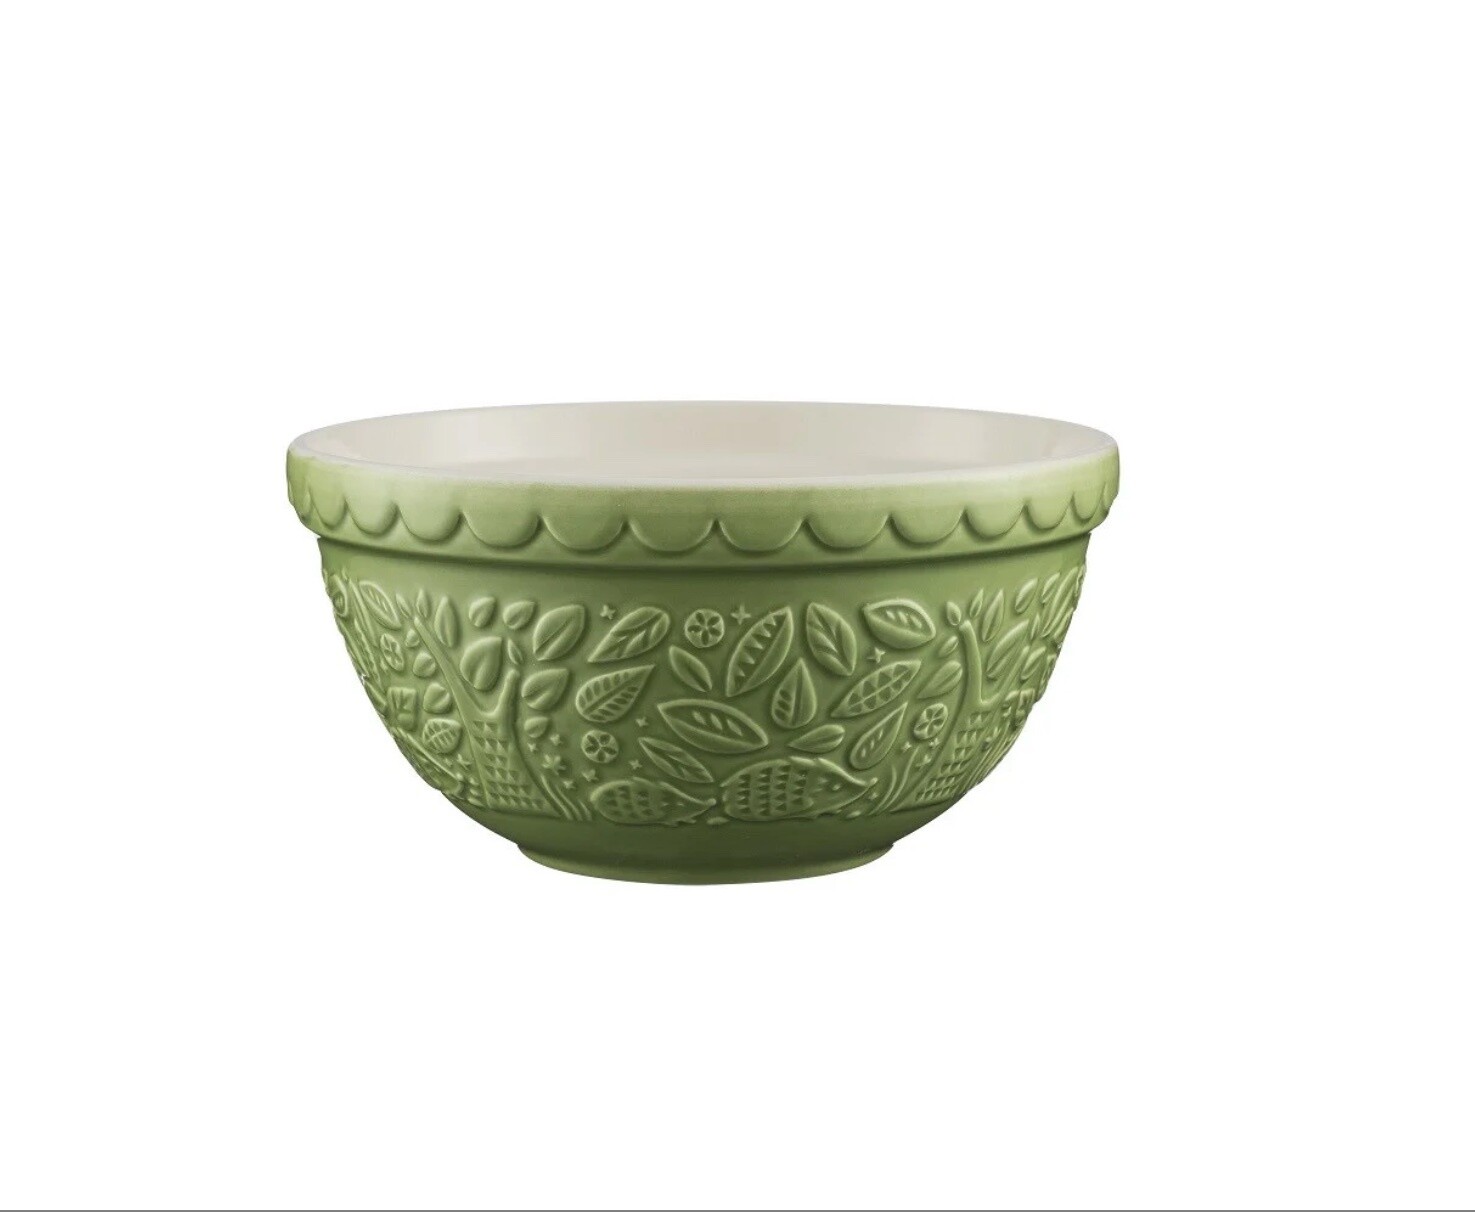 MASON CASH - Mixing Bowl-21cm/1.1L - In The Forest - Hedgehog - Green